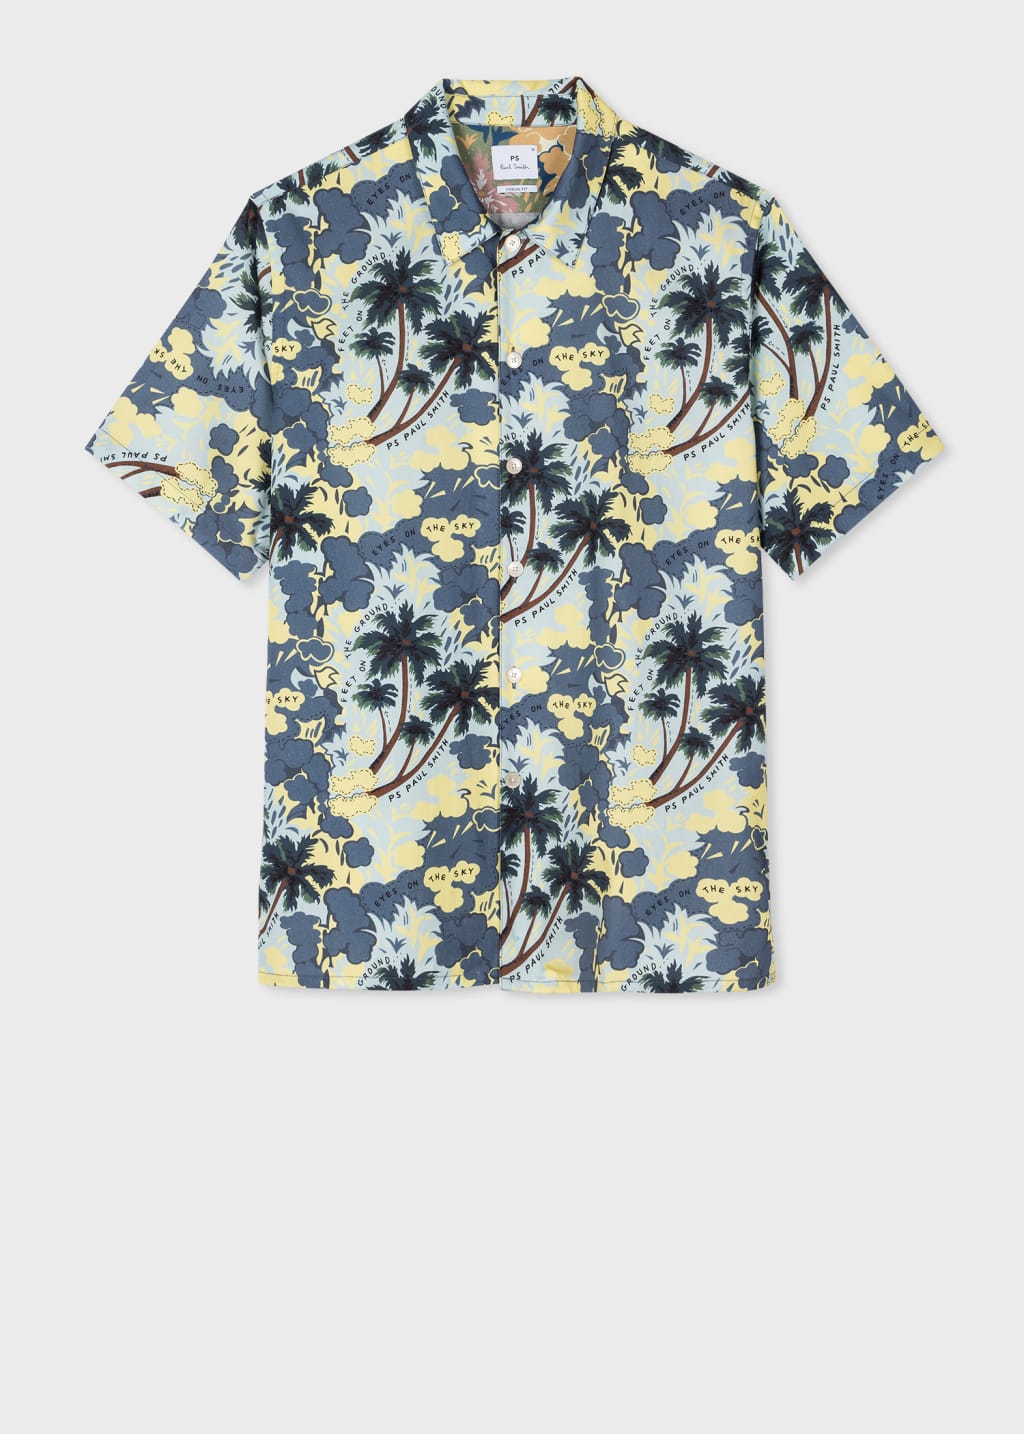 Front View - 'Eyes On The Sky' Print Short-Sleeve Shirt Paul Smith